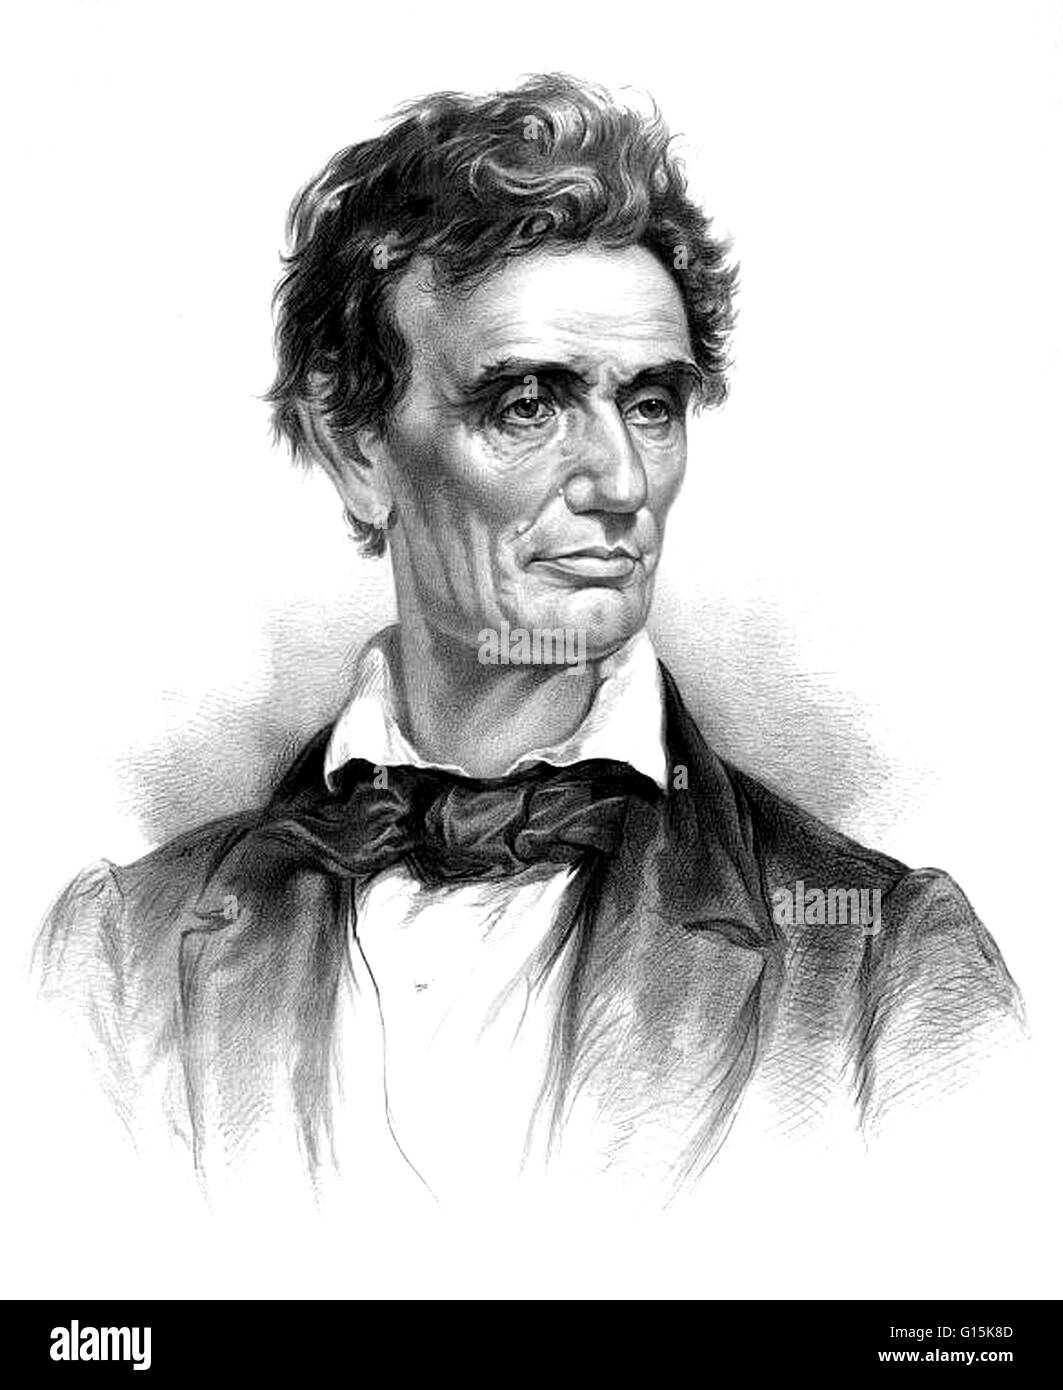 Abraham Lincoln (February 12, 1809 - April 15, 1865) was the 16th President of the United States, from March 1861 until his assassination in 1865. He led his country through the American Civil War, preserving the Union, while ending slavery, and promoting Stock Photo